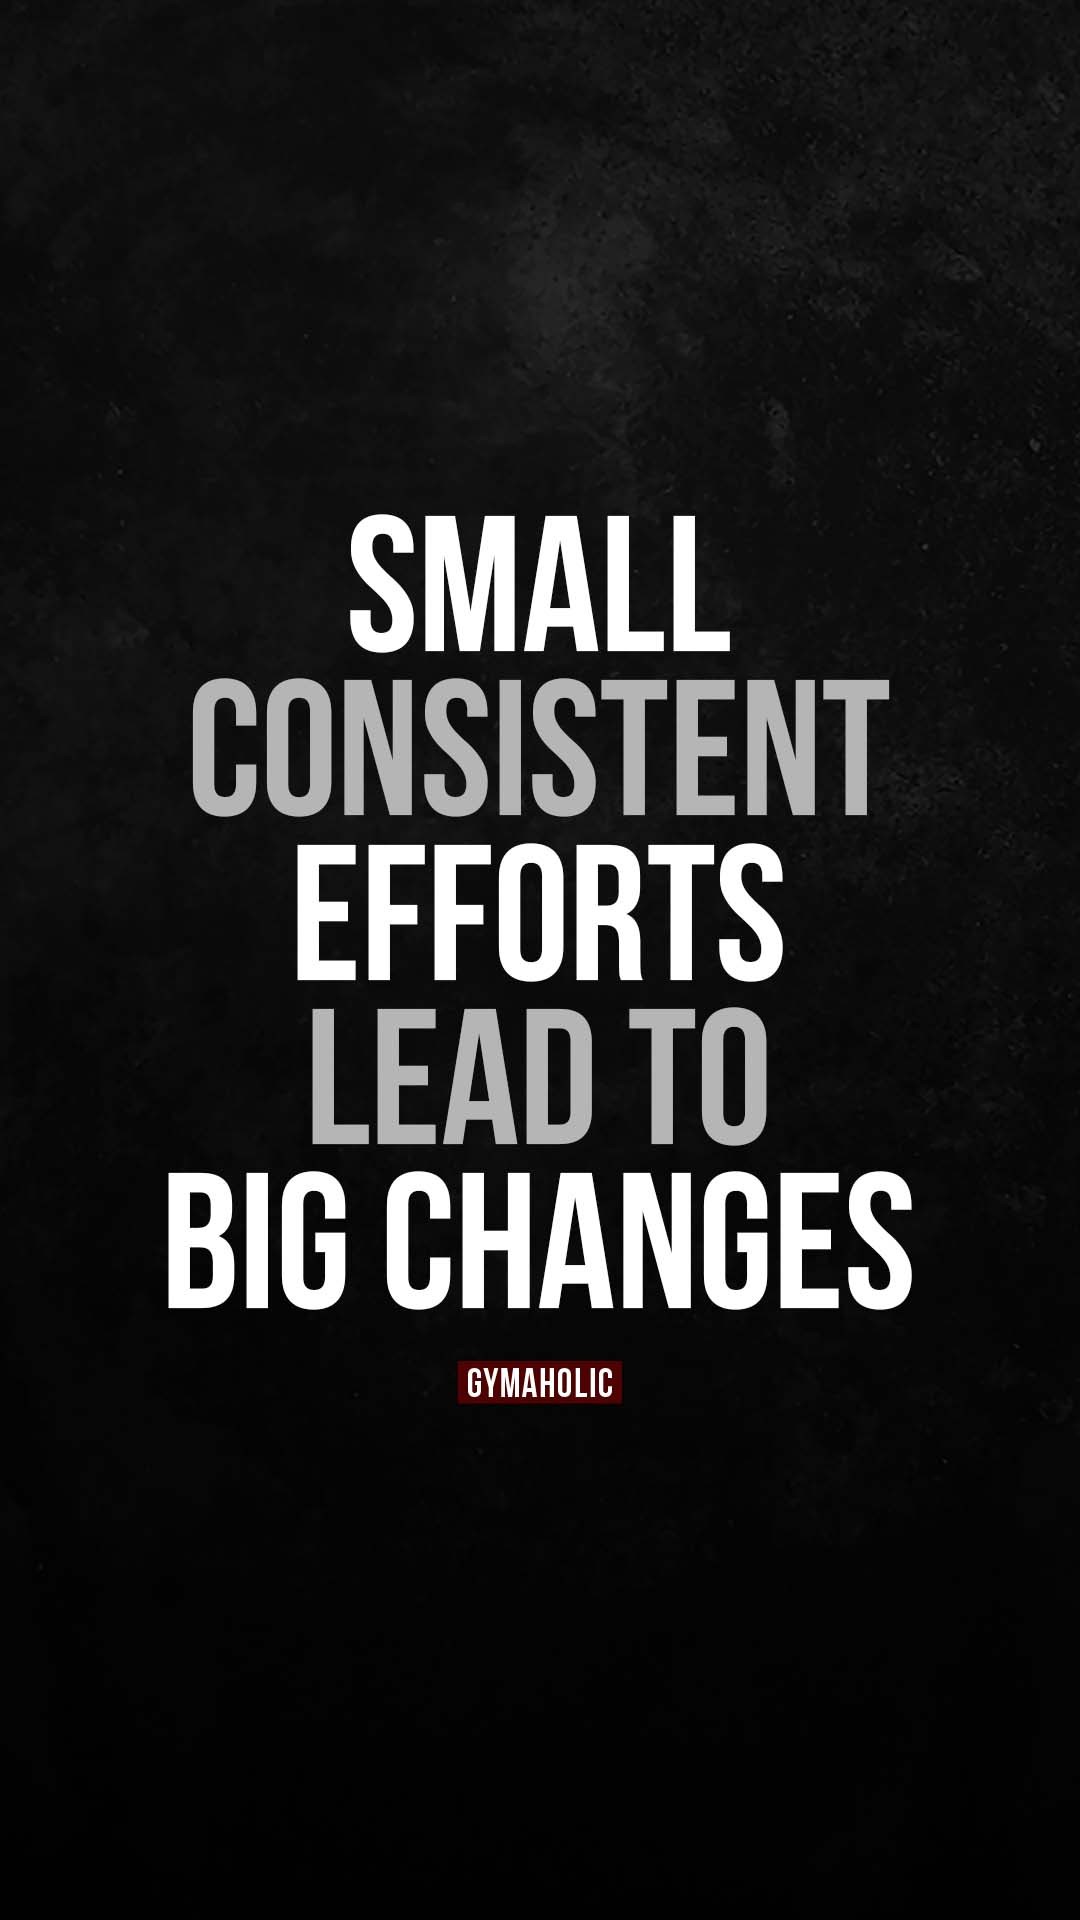 Small consistent efforts lead to big changes